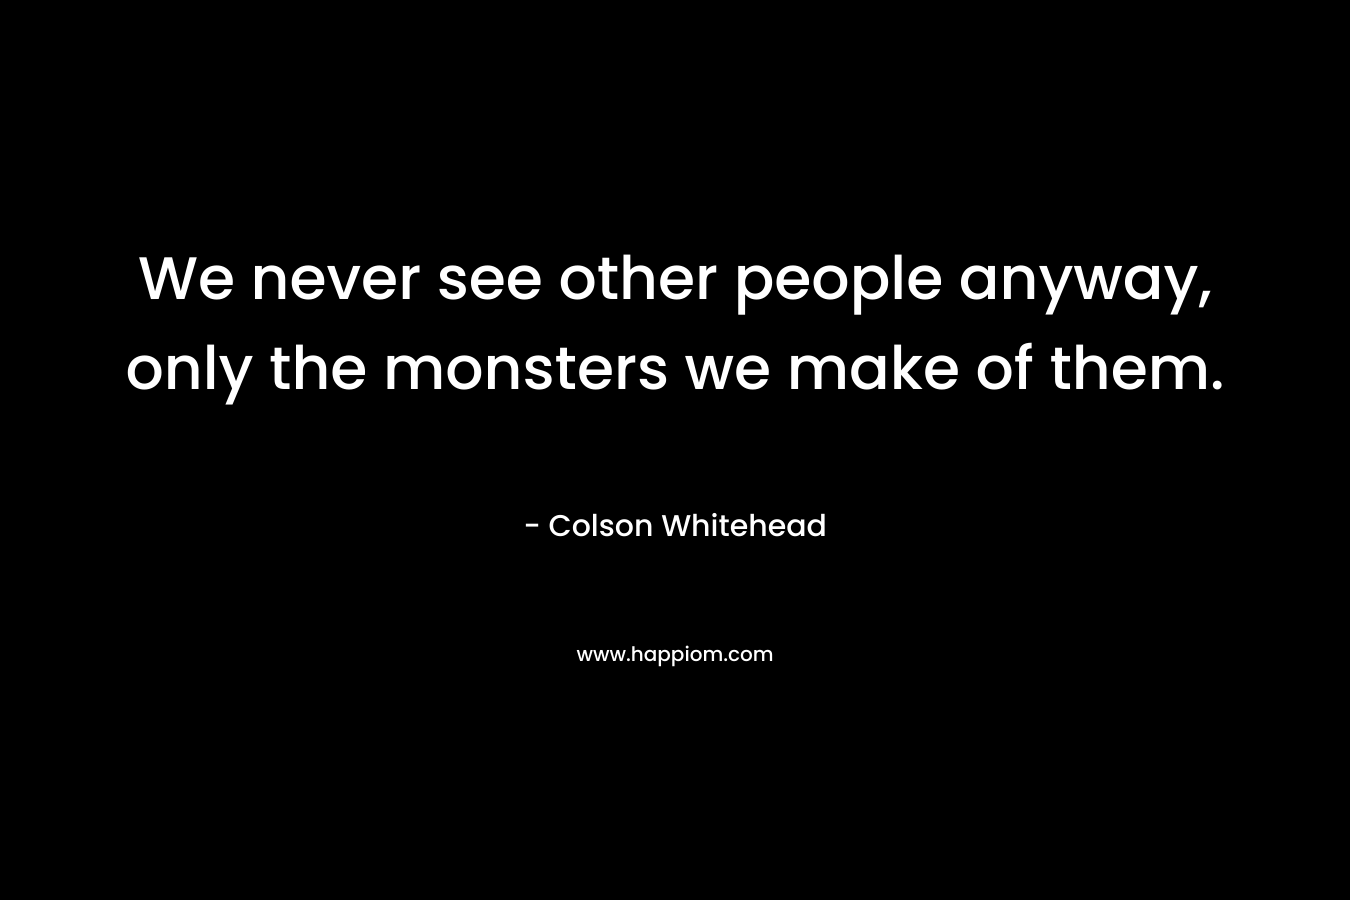 We never see other people anyway, only the monsters we make of them. – Colson Whitehead